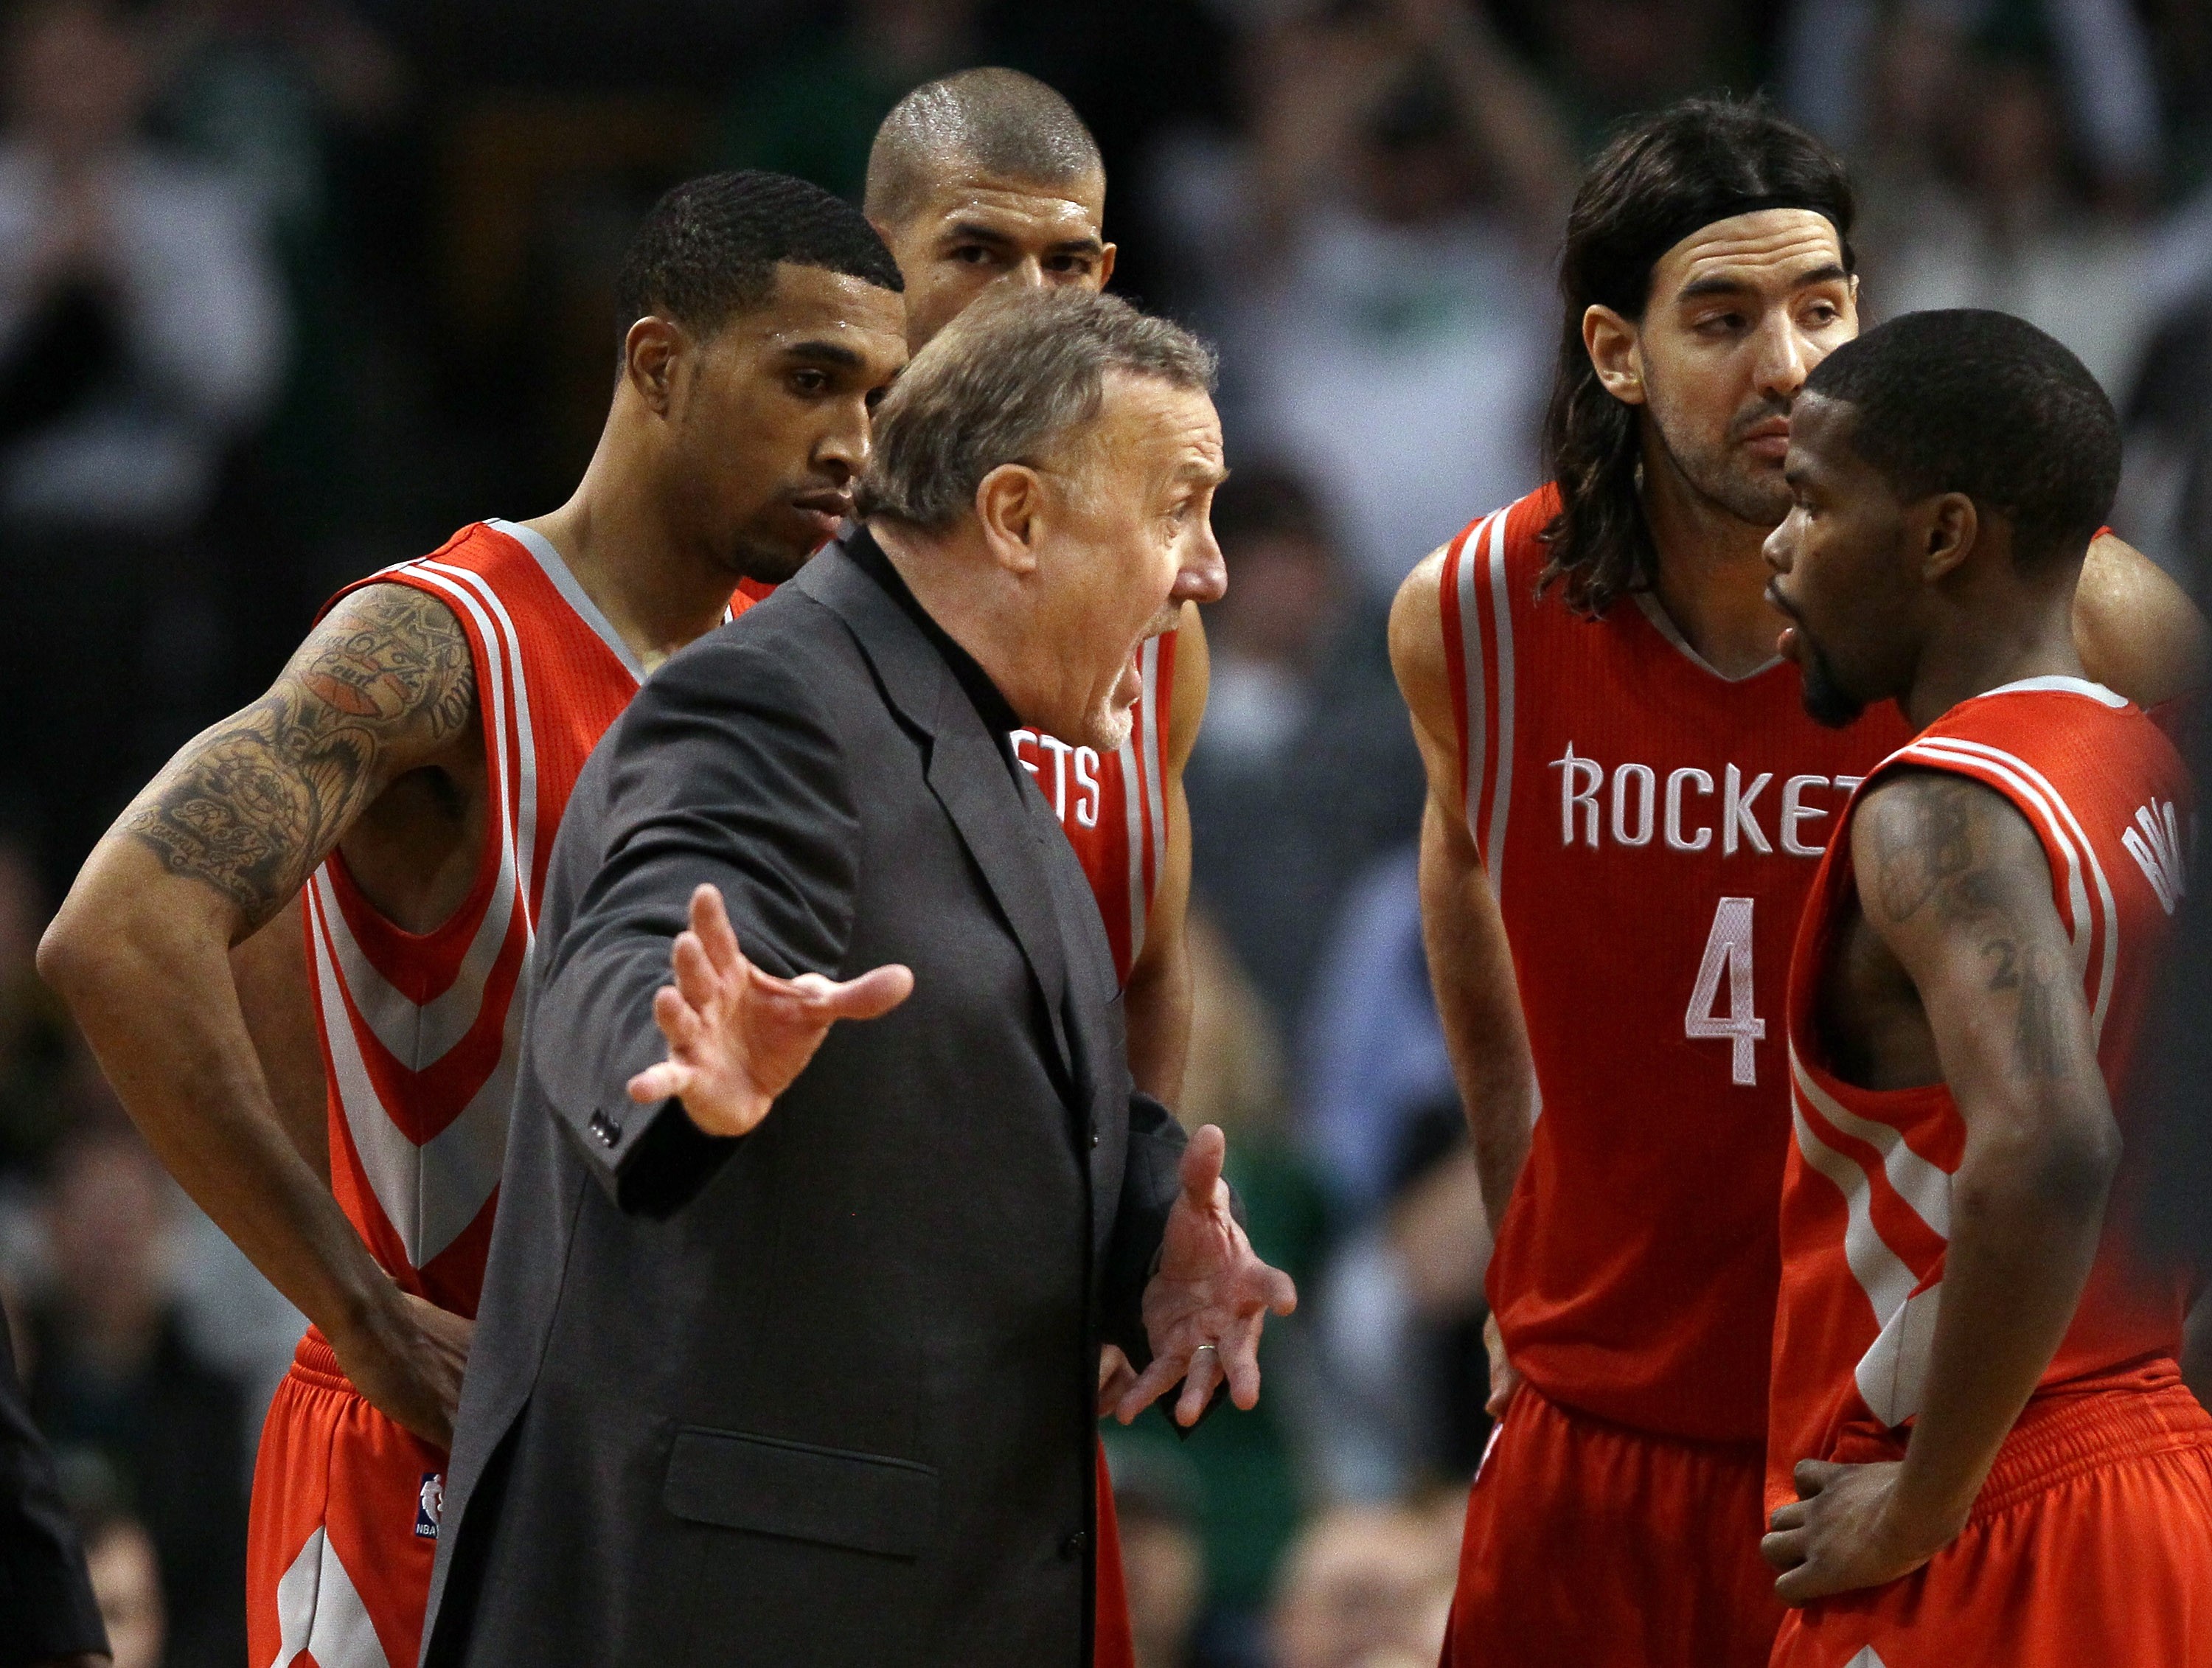 BOSTON, MA - JANUARY 10:  Head coach Rick Adelman of the Houston Rockets talks with Aaron Brooks #0 as Shane Battier #31,Kyle Lowry #7 and Luis Scola #4 stand by during a time out in the final seconds of the game against the Boston Celtics on January 10,